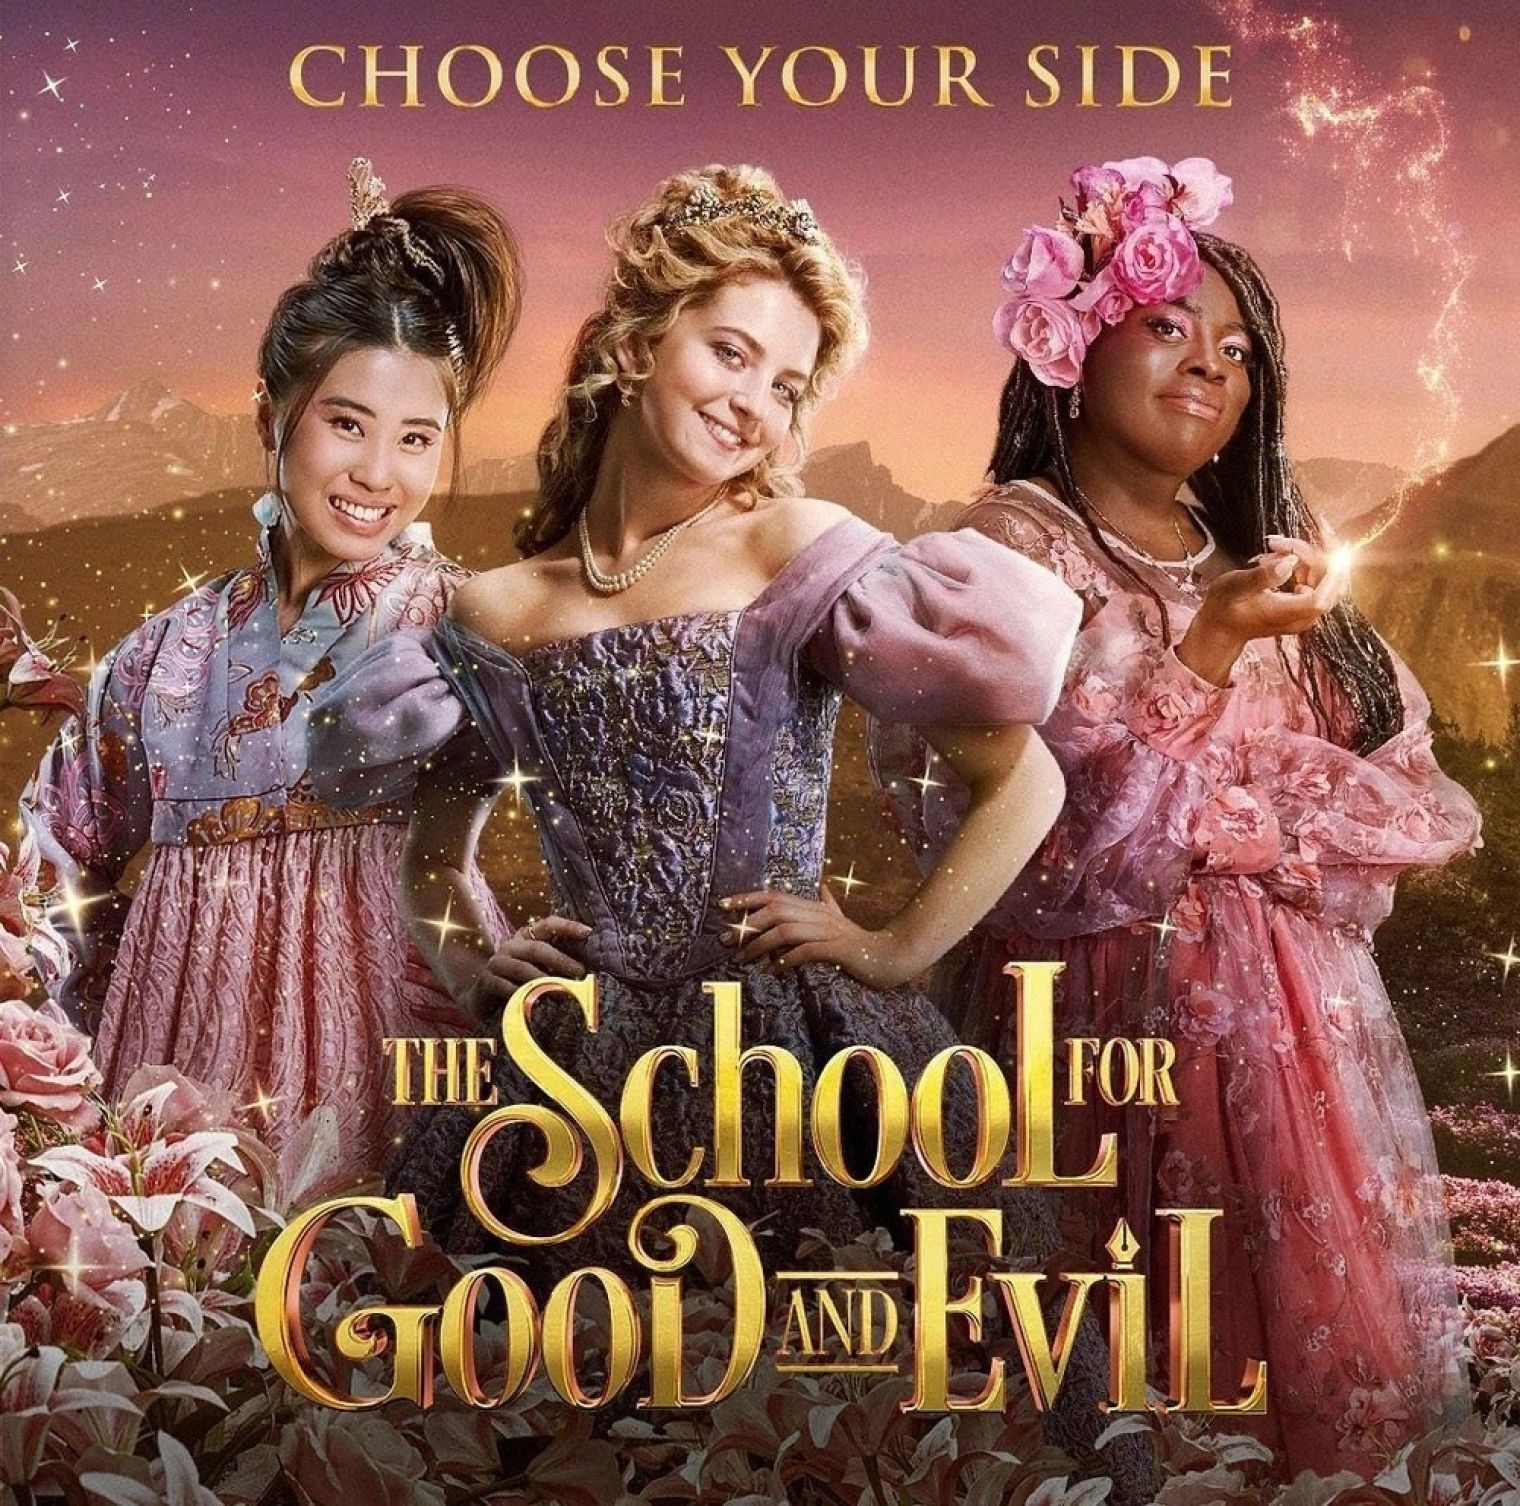 Chinenye Ezeudu stars in one of this year's most highly anticipated films, fantasy action film ‘The School for Good and Evil’